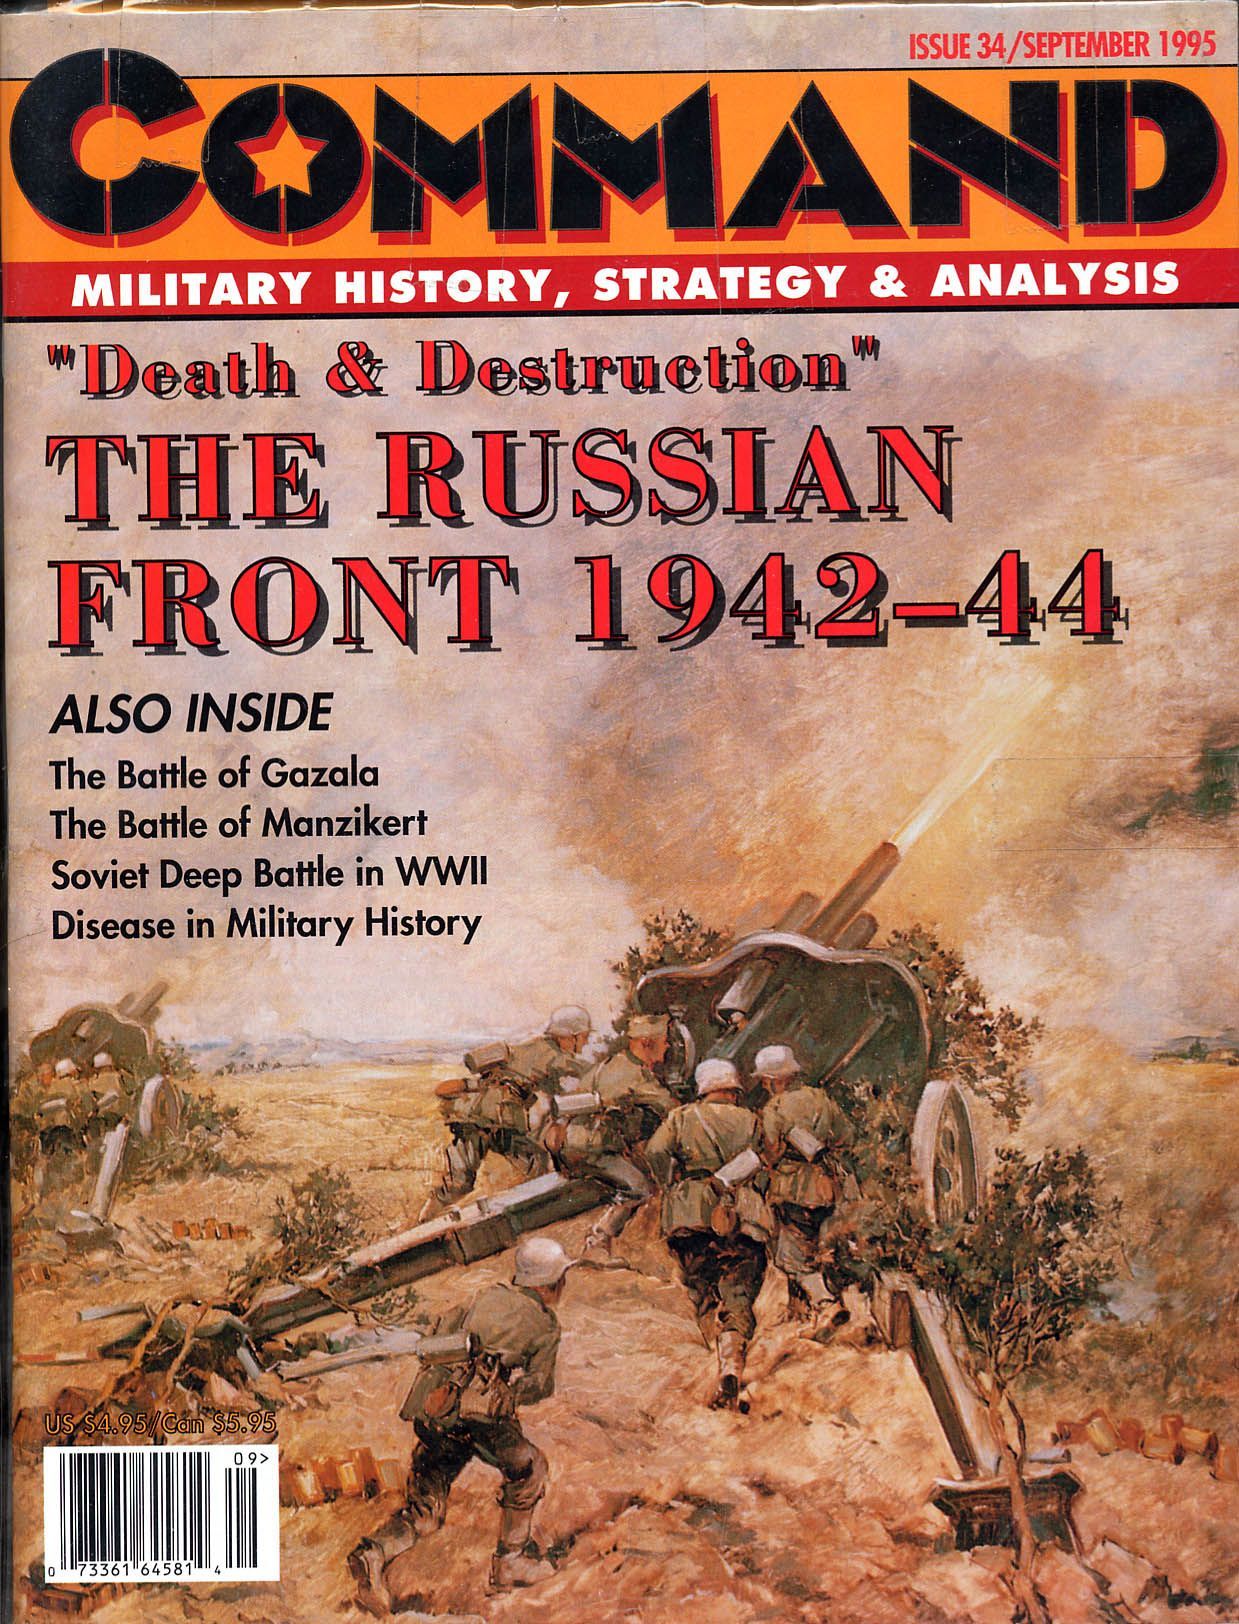 Proud Monster: The Barbarossa Campaign – Death & Destruction: The Russian Front 1942-44